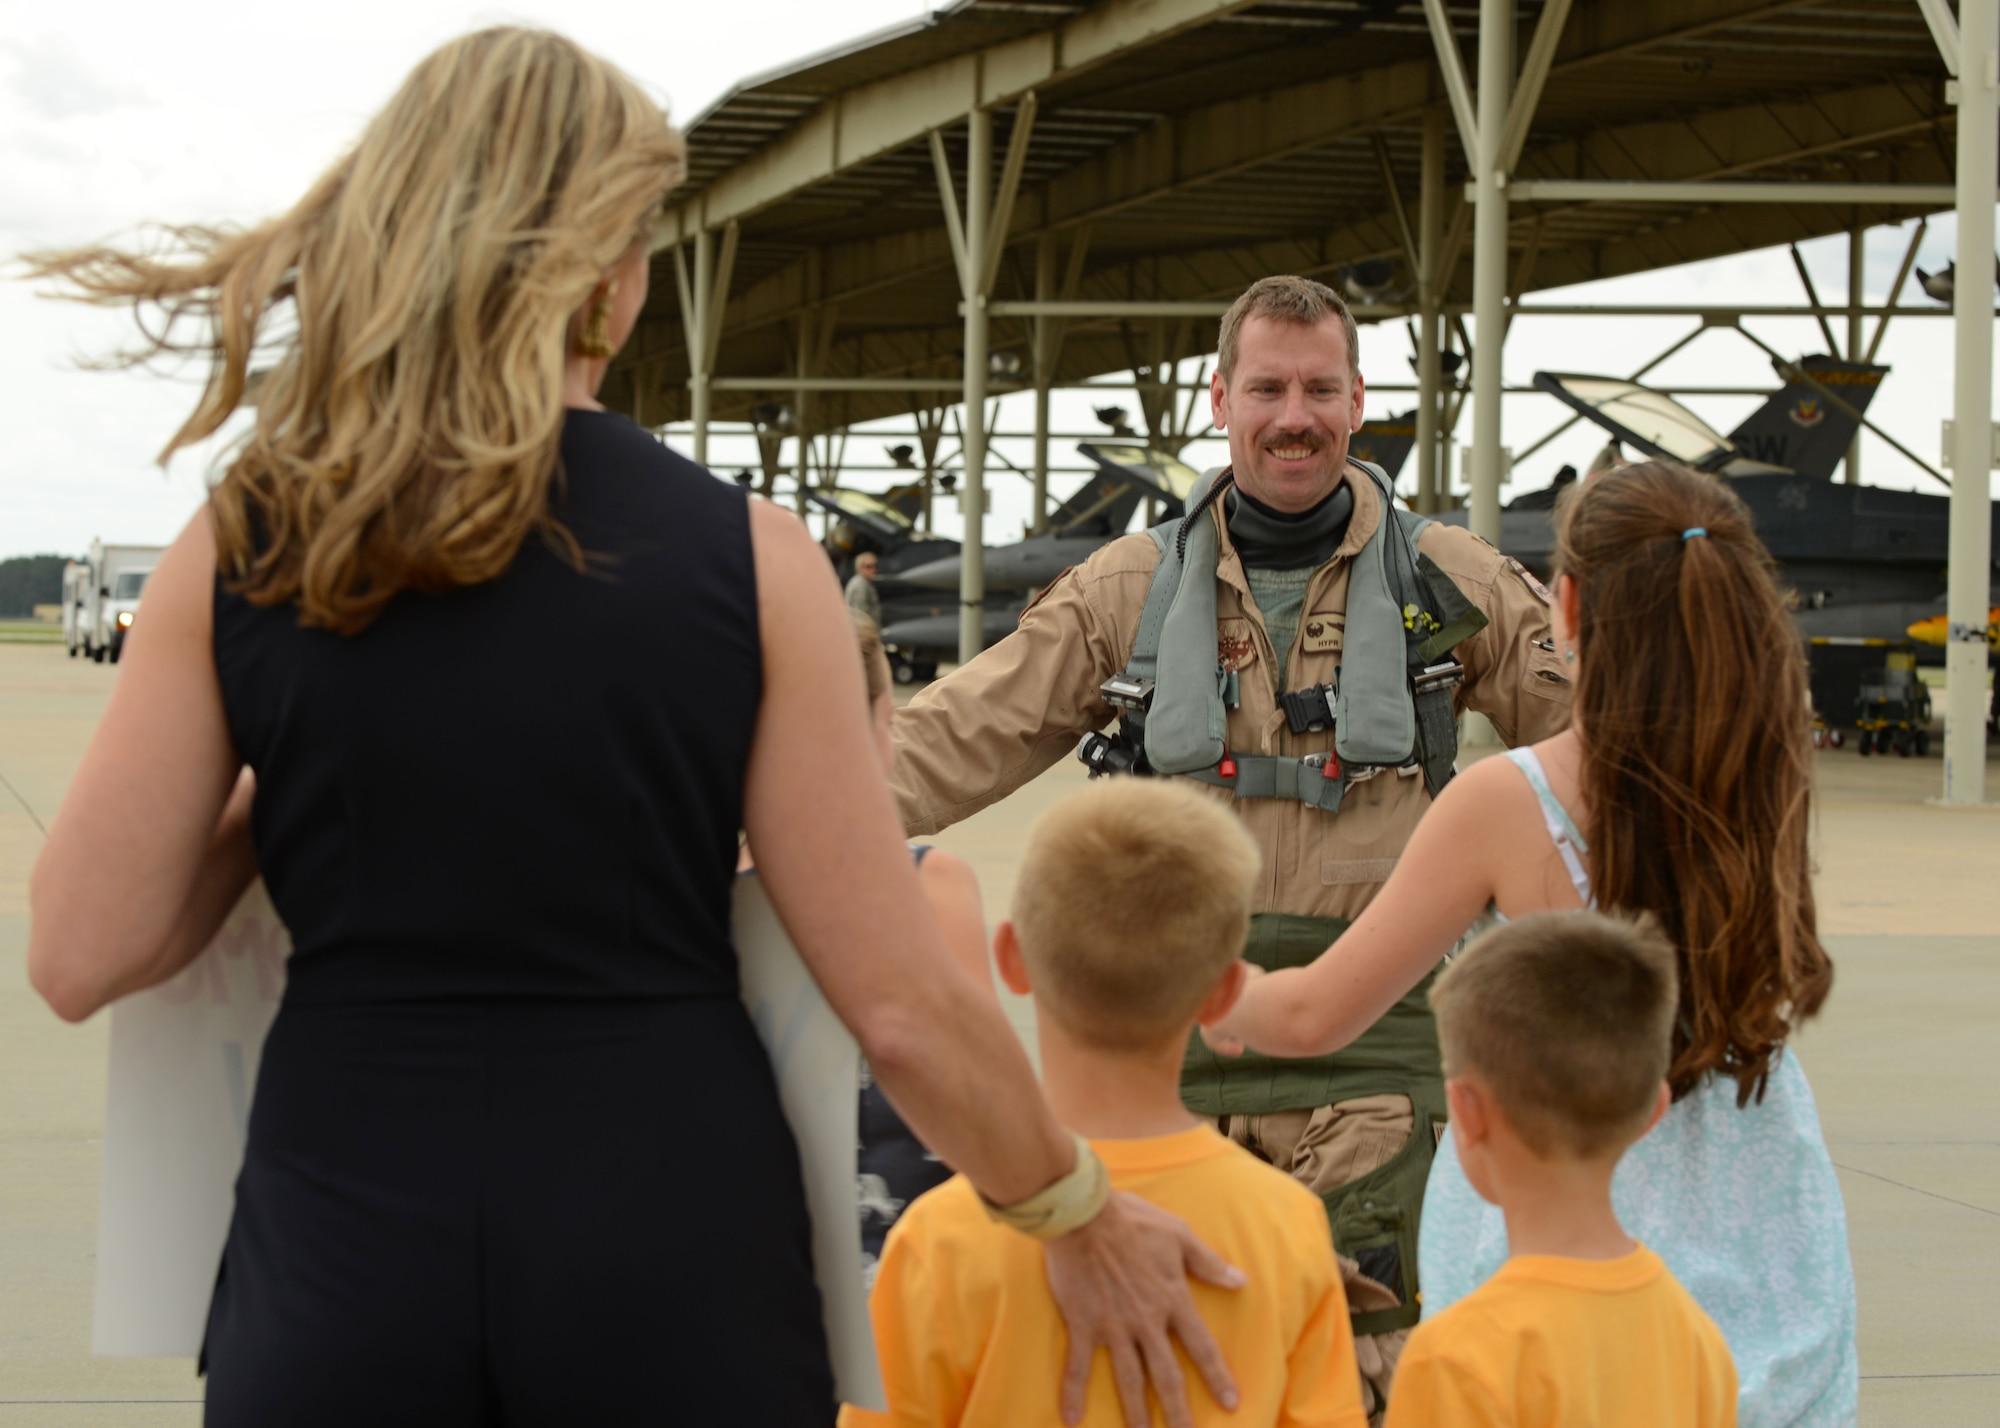 A U.S. Airman assigned to the 79th Fighter Squadron (FS) prepares to hug his family after returning to Shaw Air Force Base, S.C., May 4, 2017. The 79th FS is one of three 20th Fighter Wing F-16CM Fighting Falcon squadrons which supply suppression of enemy air defenses and combat-ready airpower. (U.S. Air Force Airman 1st Class Kathryn R.C. Reaves)